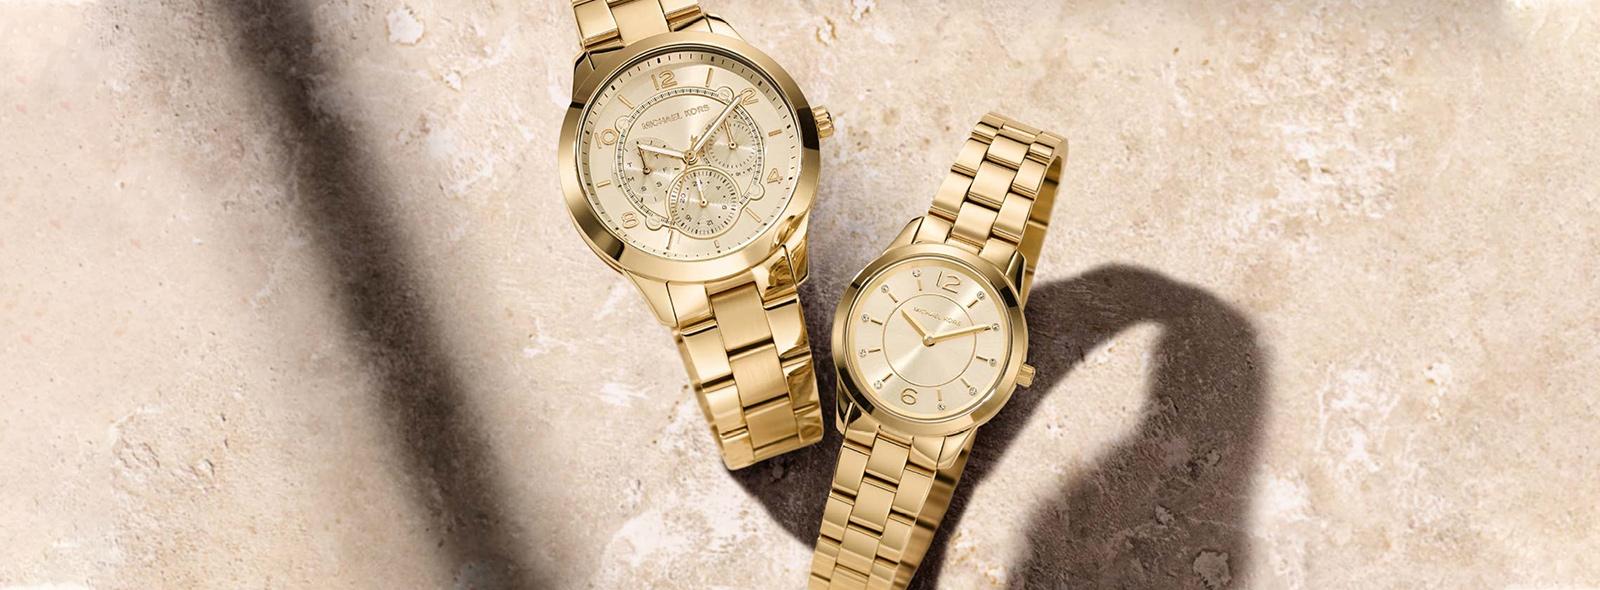 Michael Kors - Go for a luxury watch with class | Blog at Watchard.com